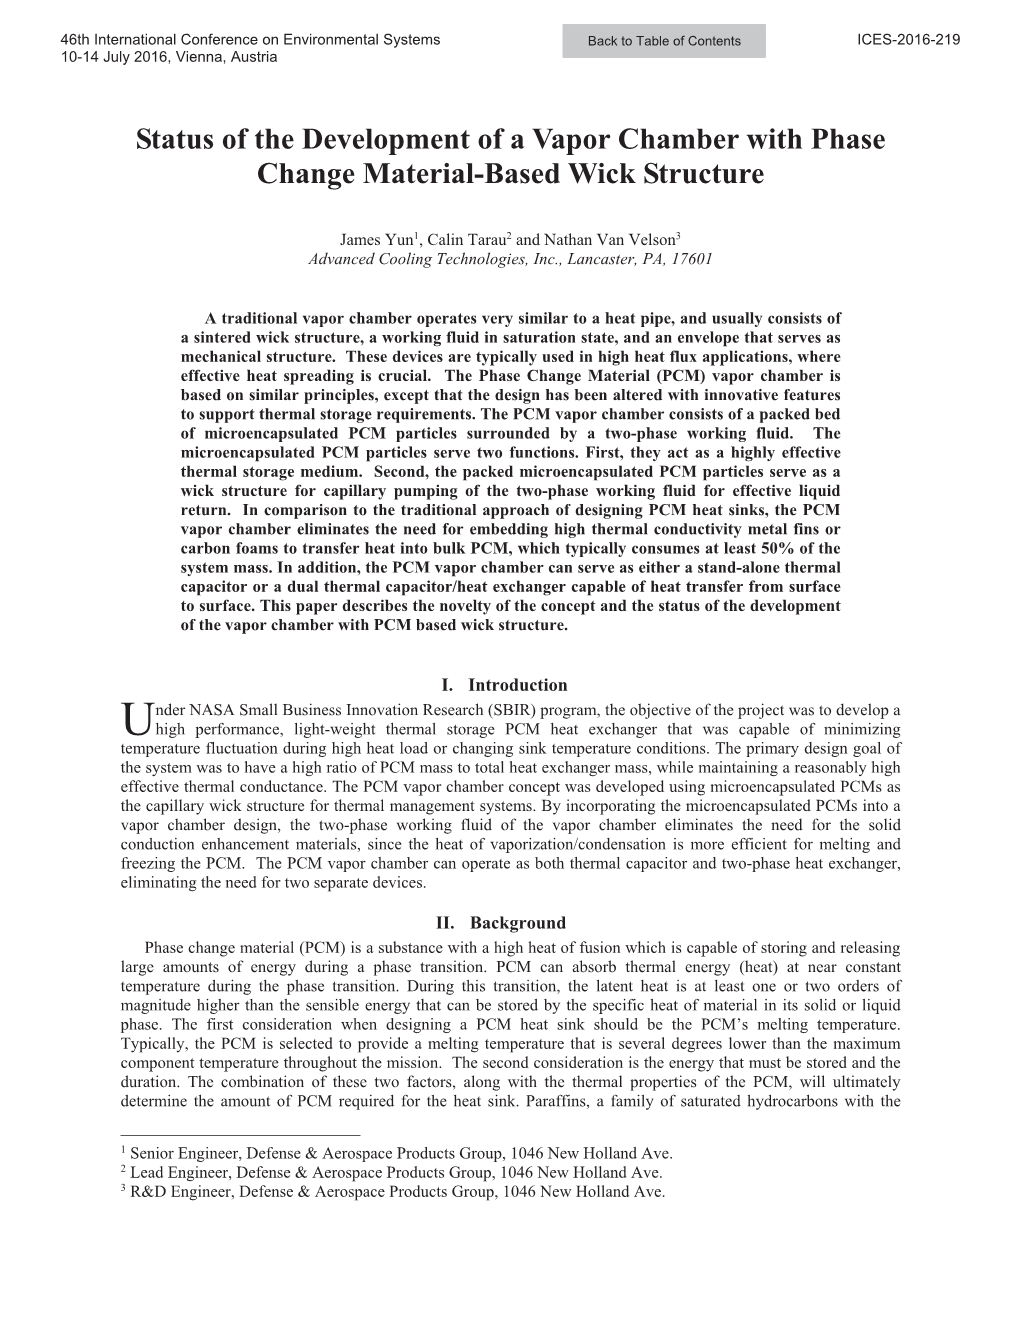 Status of the Development of a Vapor Chamber with Phase Change Material-Based Wick Structure